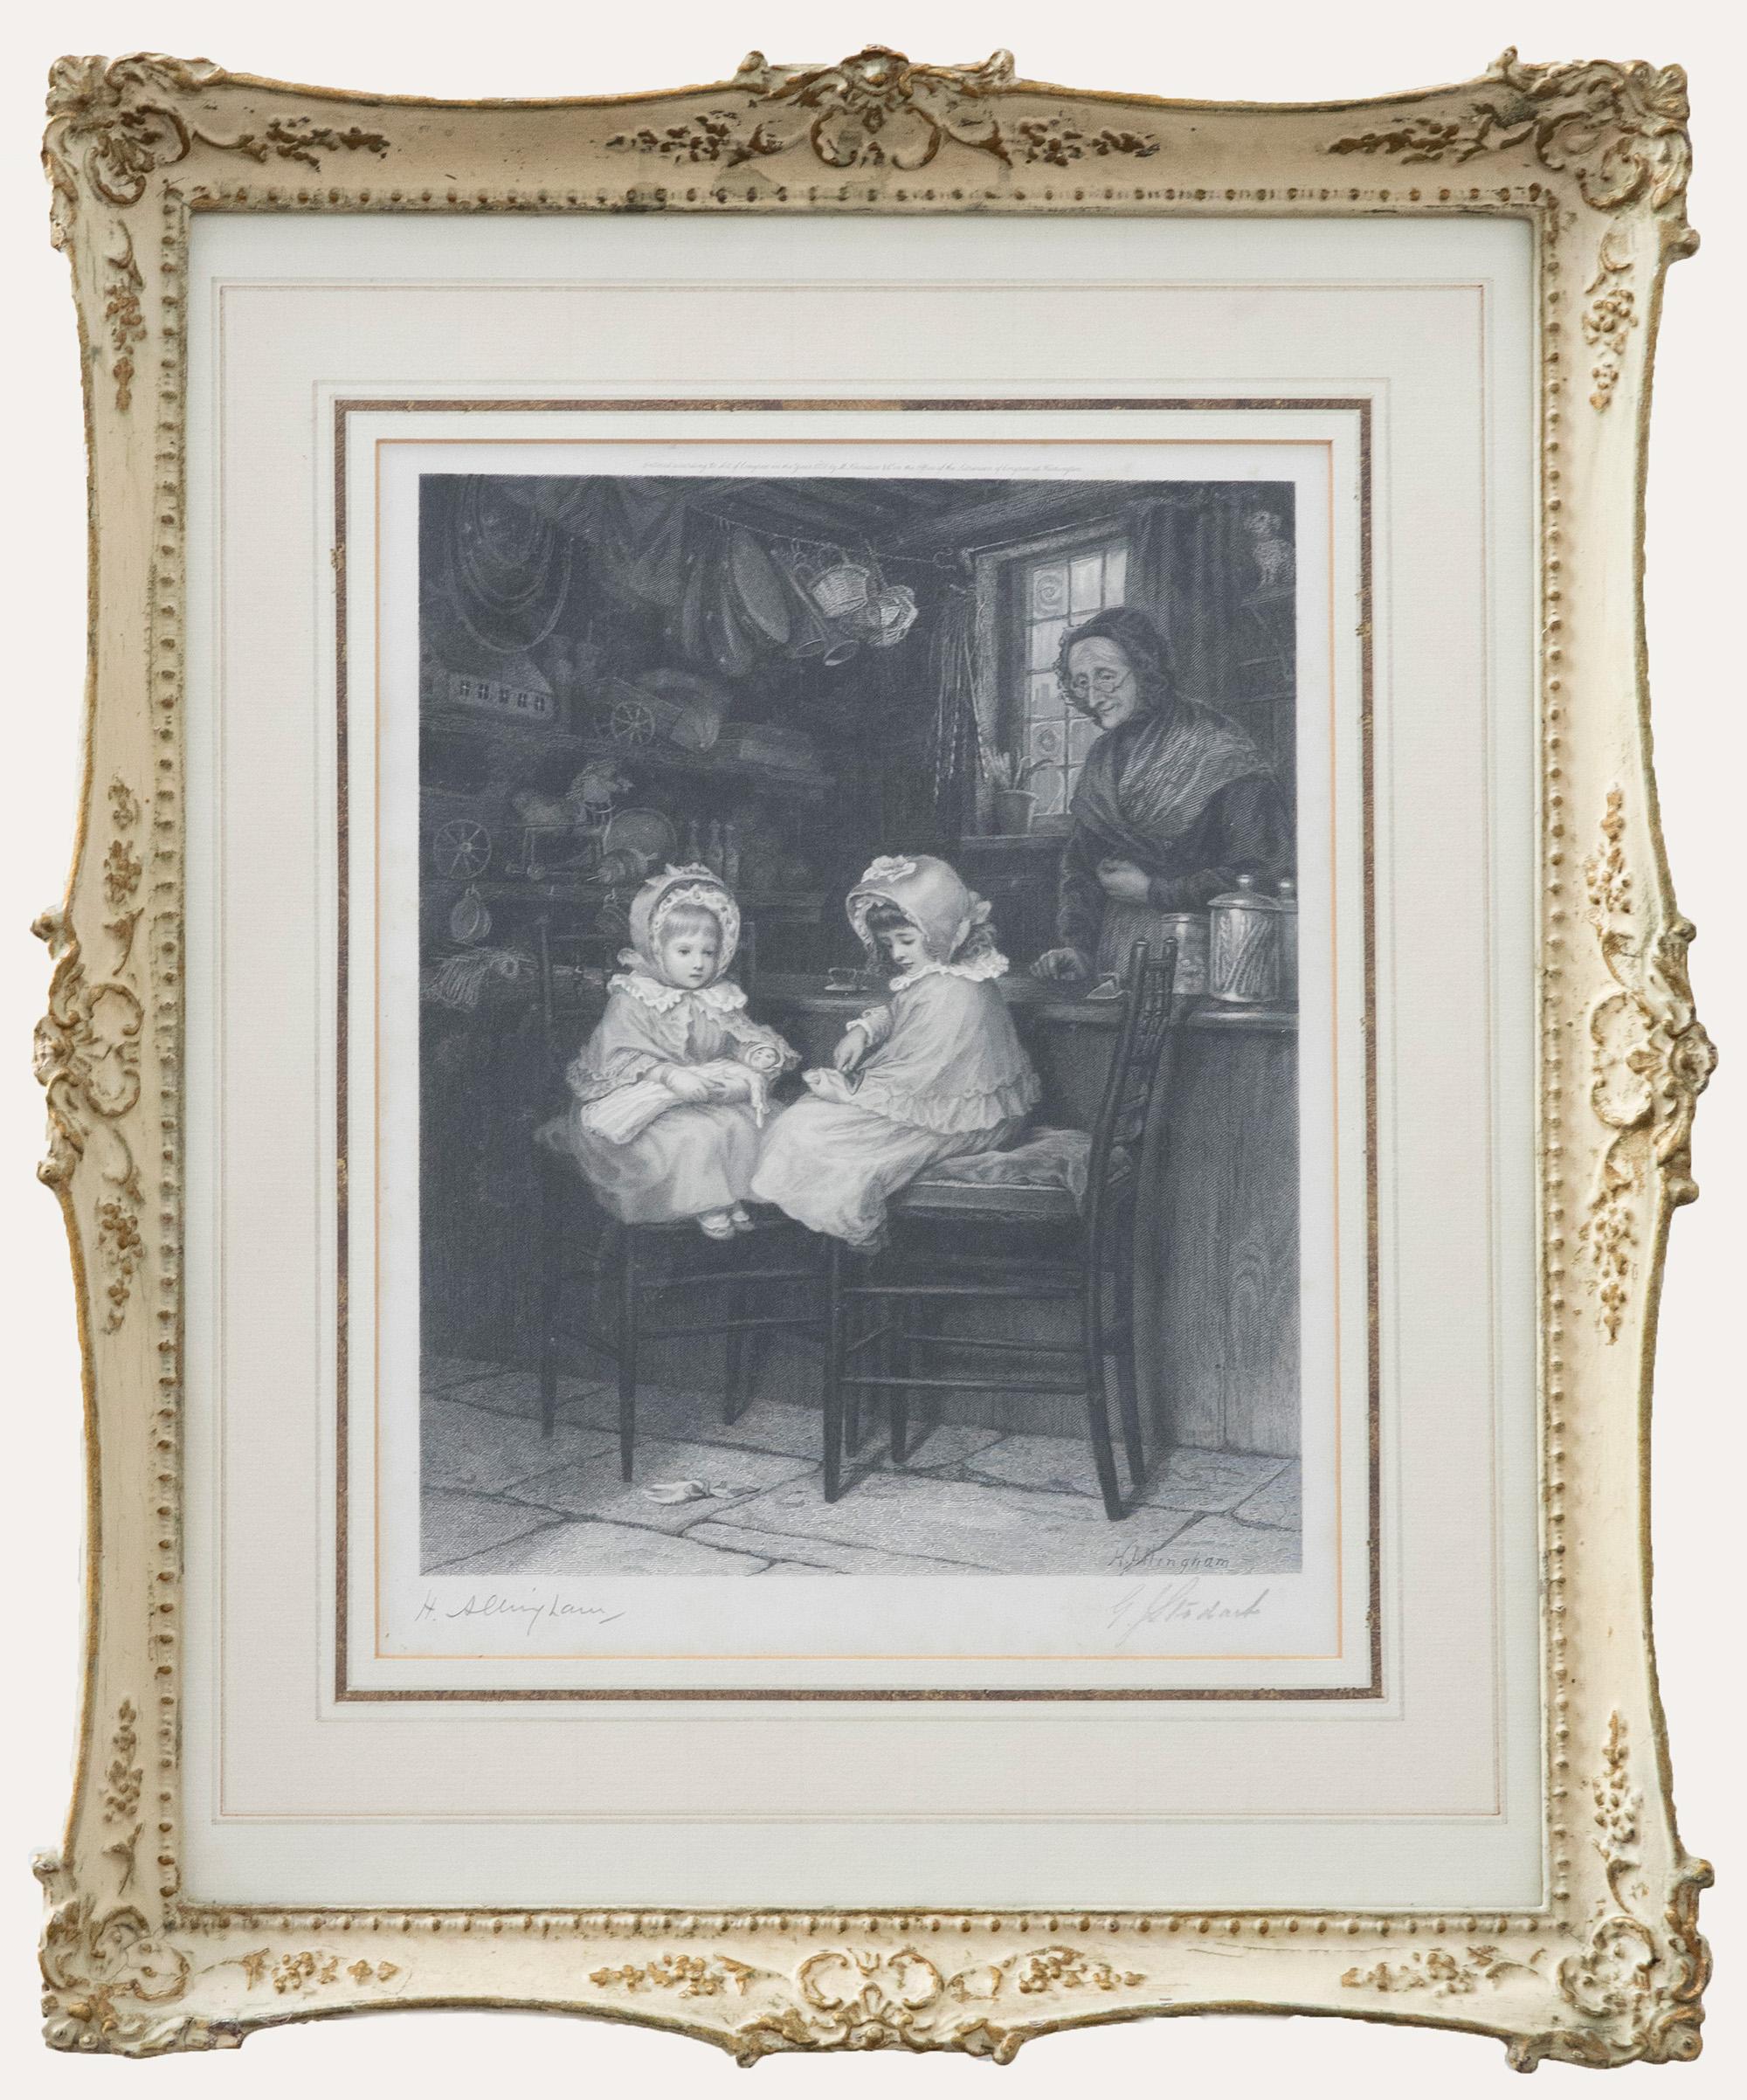 Unknown Figurative Print - G. Stodart after Helen Allingham - 1880 Engraving, The Young Customers